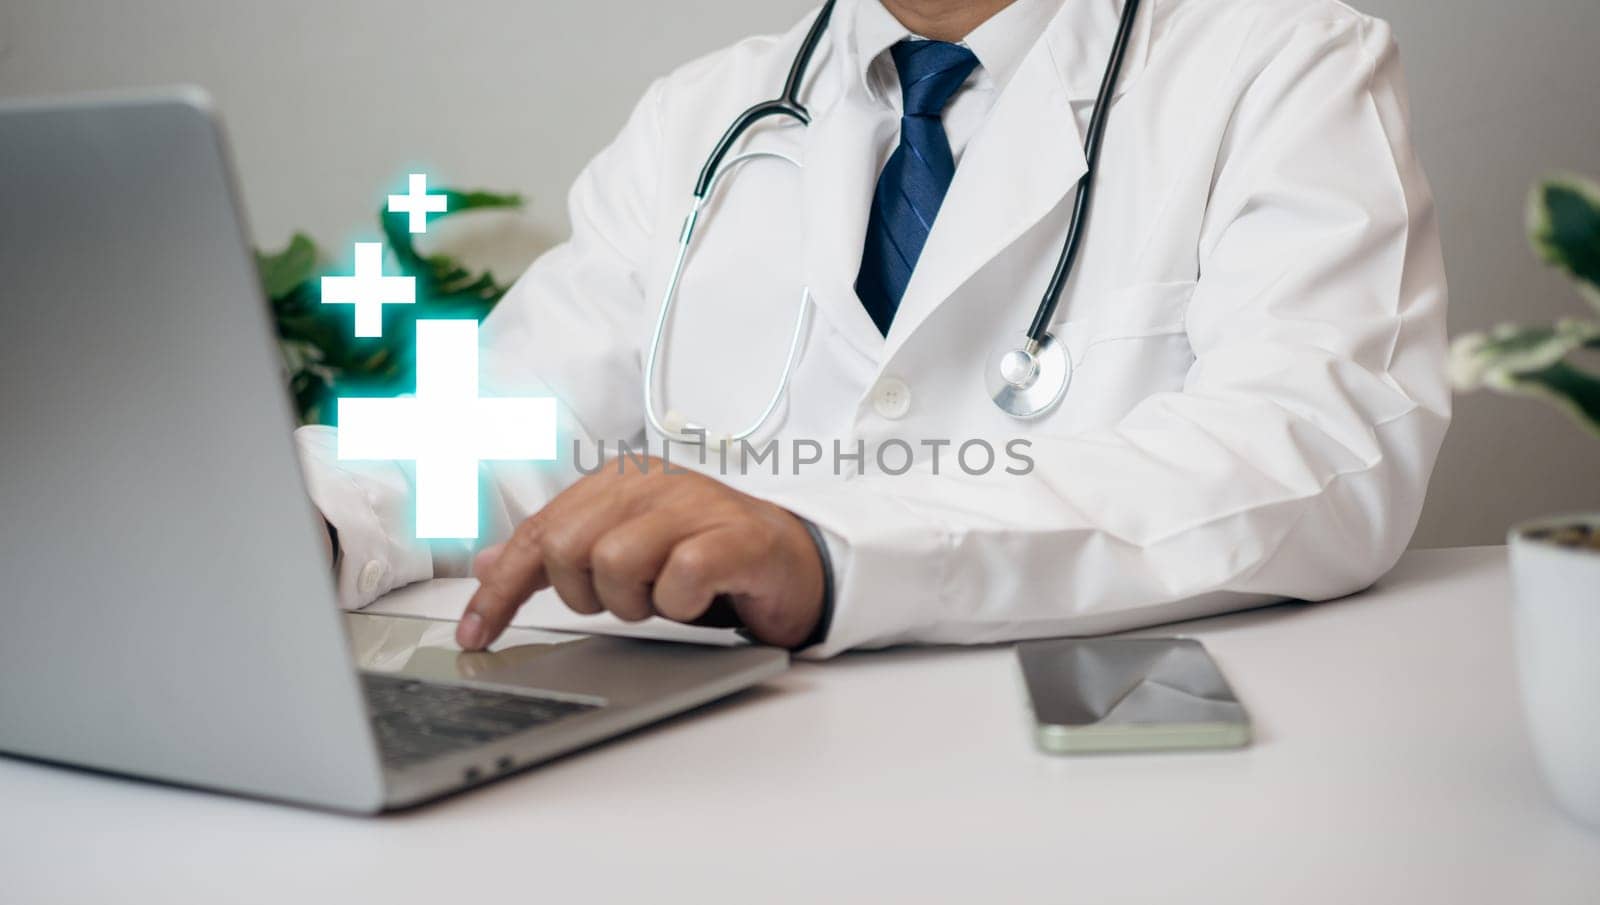 Doctors use computers to research medical information. Medical concept. insurance concept by Unimages2527